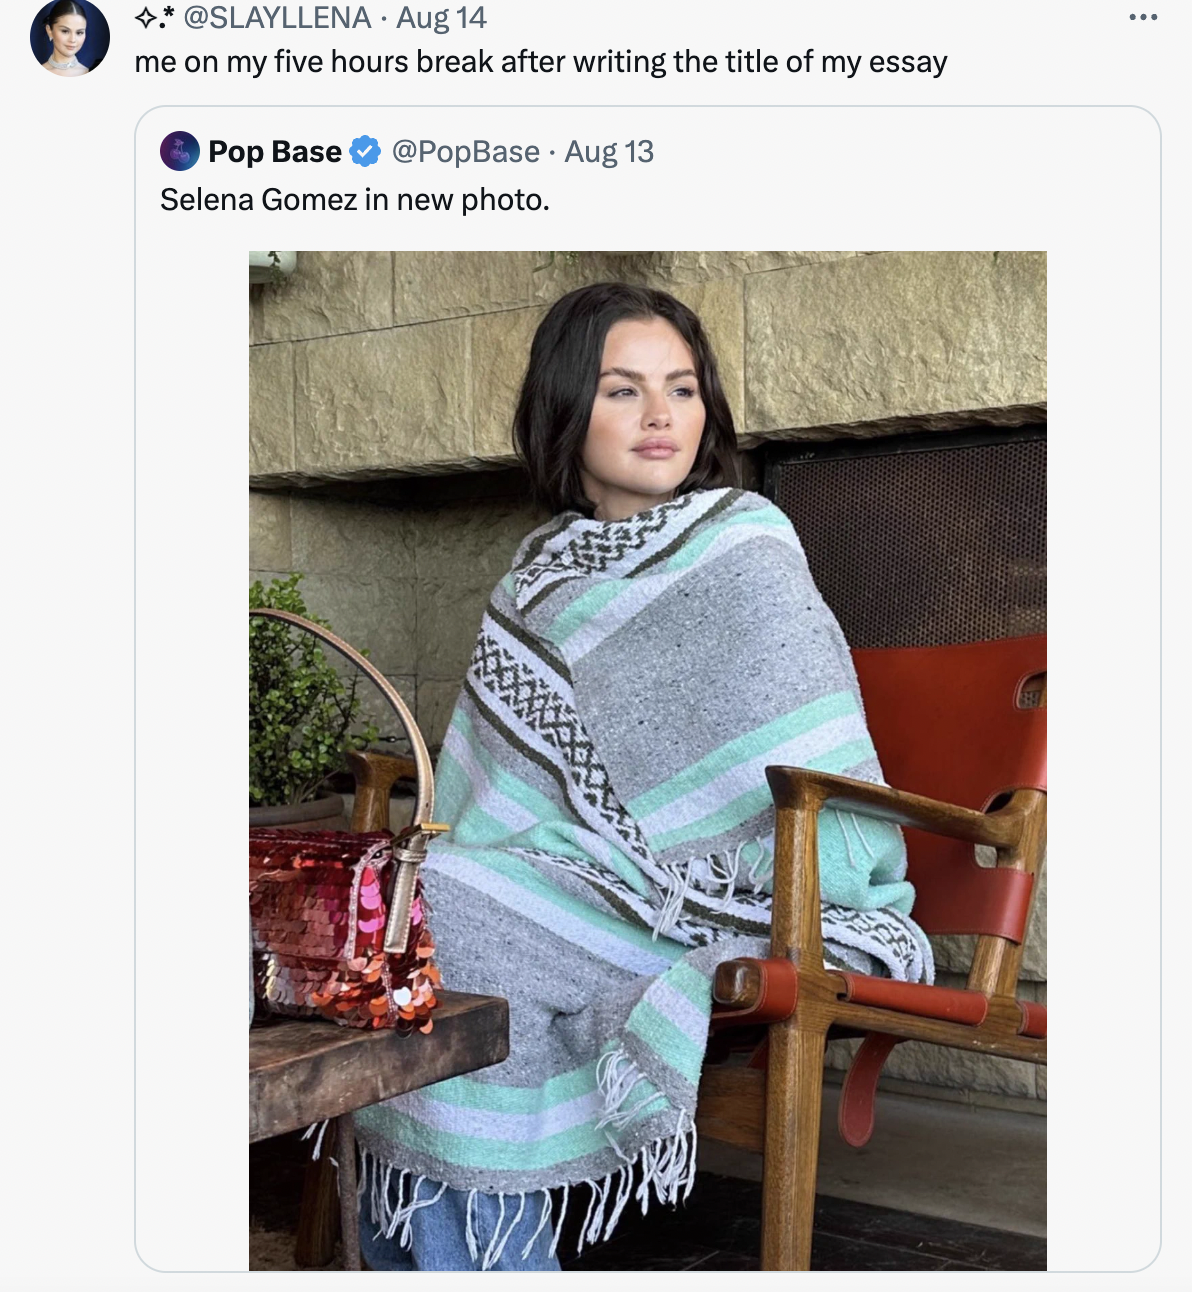 selena gomez in a blanket - stole - . Aug 14 me on my five hours break after writing the title of my essay Pop Base Aug 13 Selena Gomez in new photo. 77440 ...